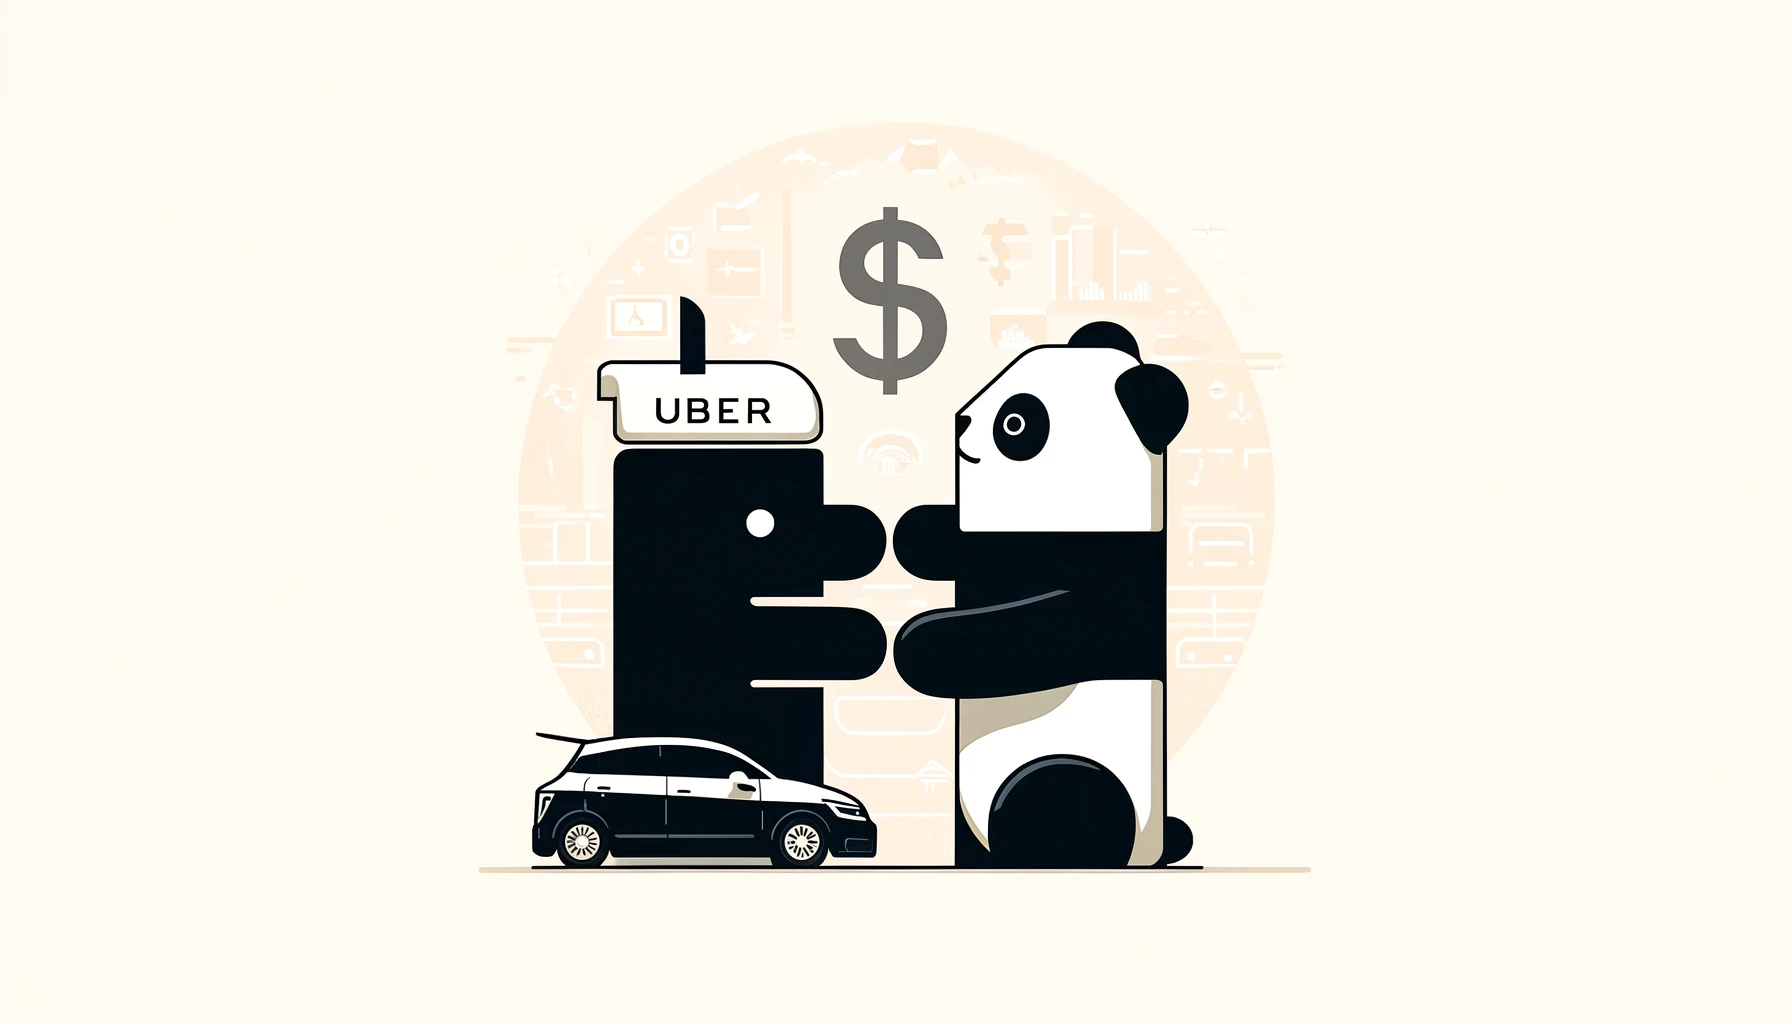 Uber to acquire Foodpanda’s Taiwan unit from Delivery Hero in a $950 million cash deal.